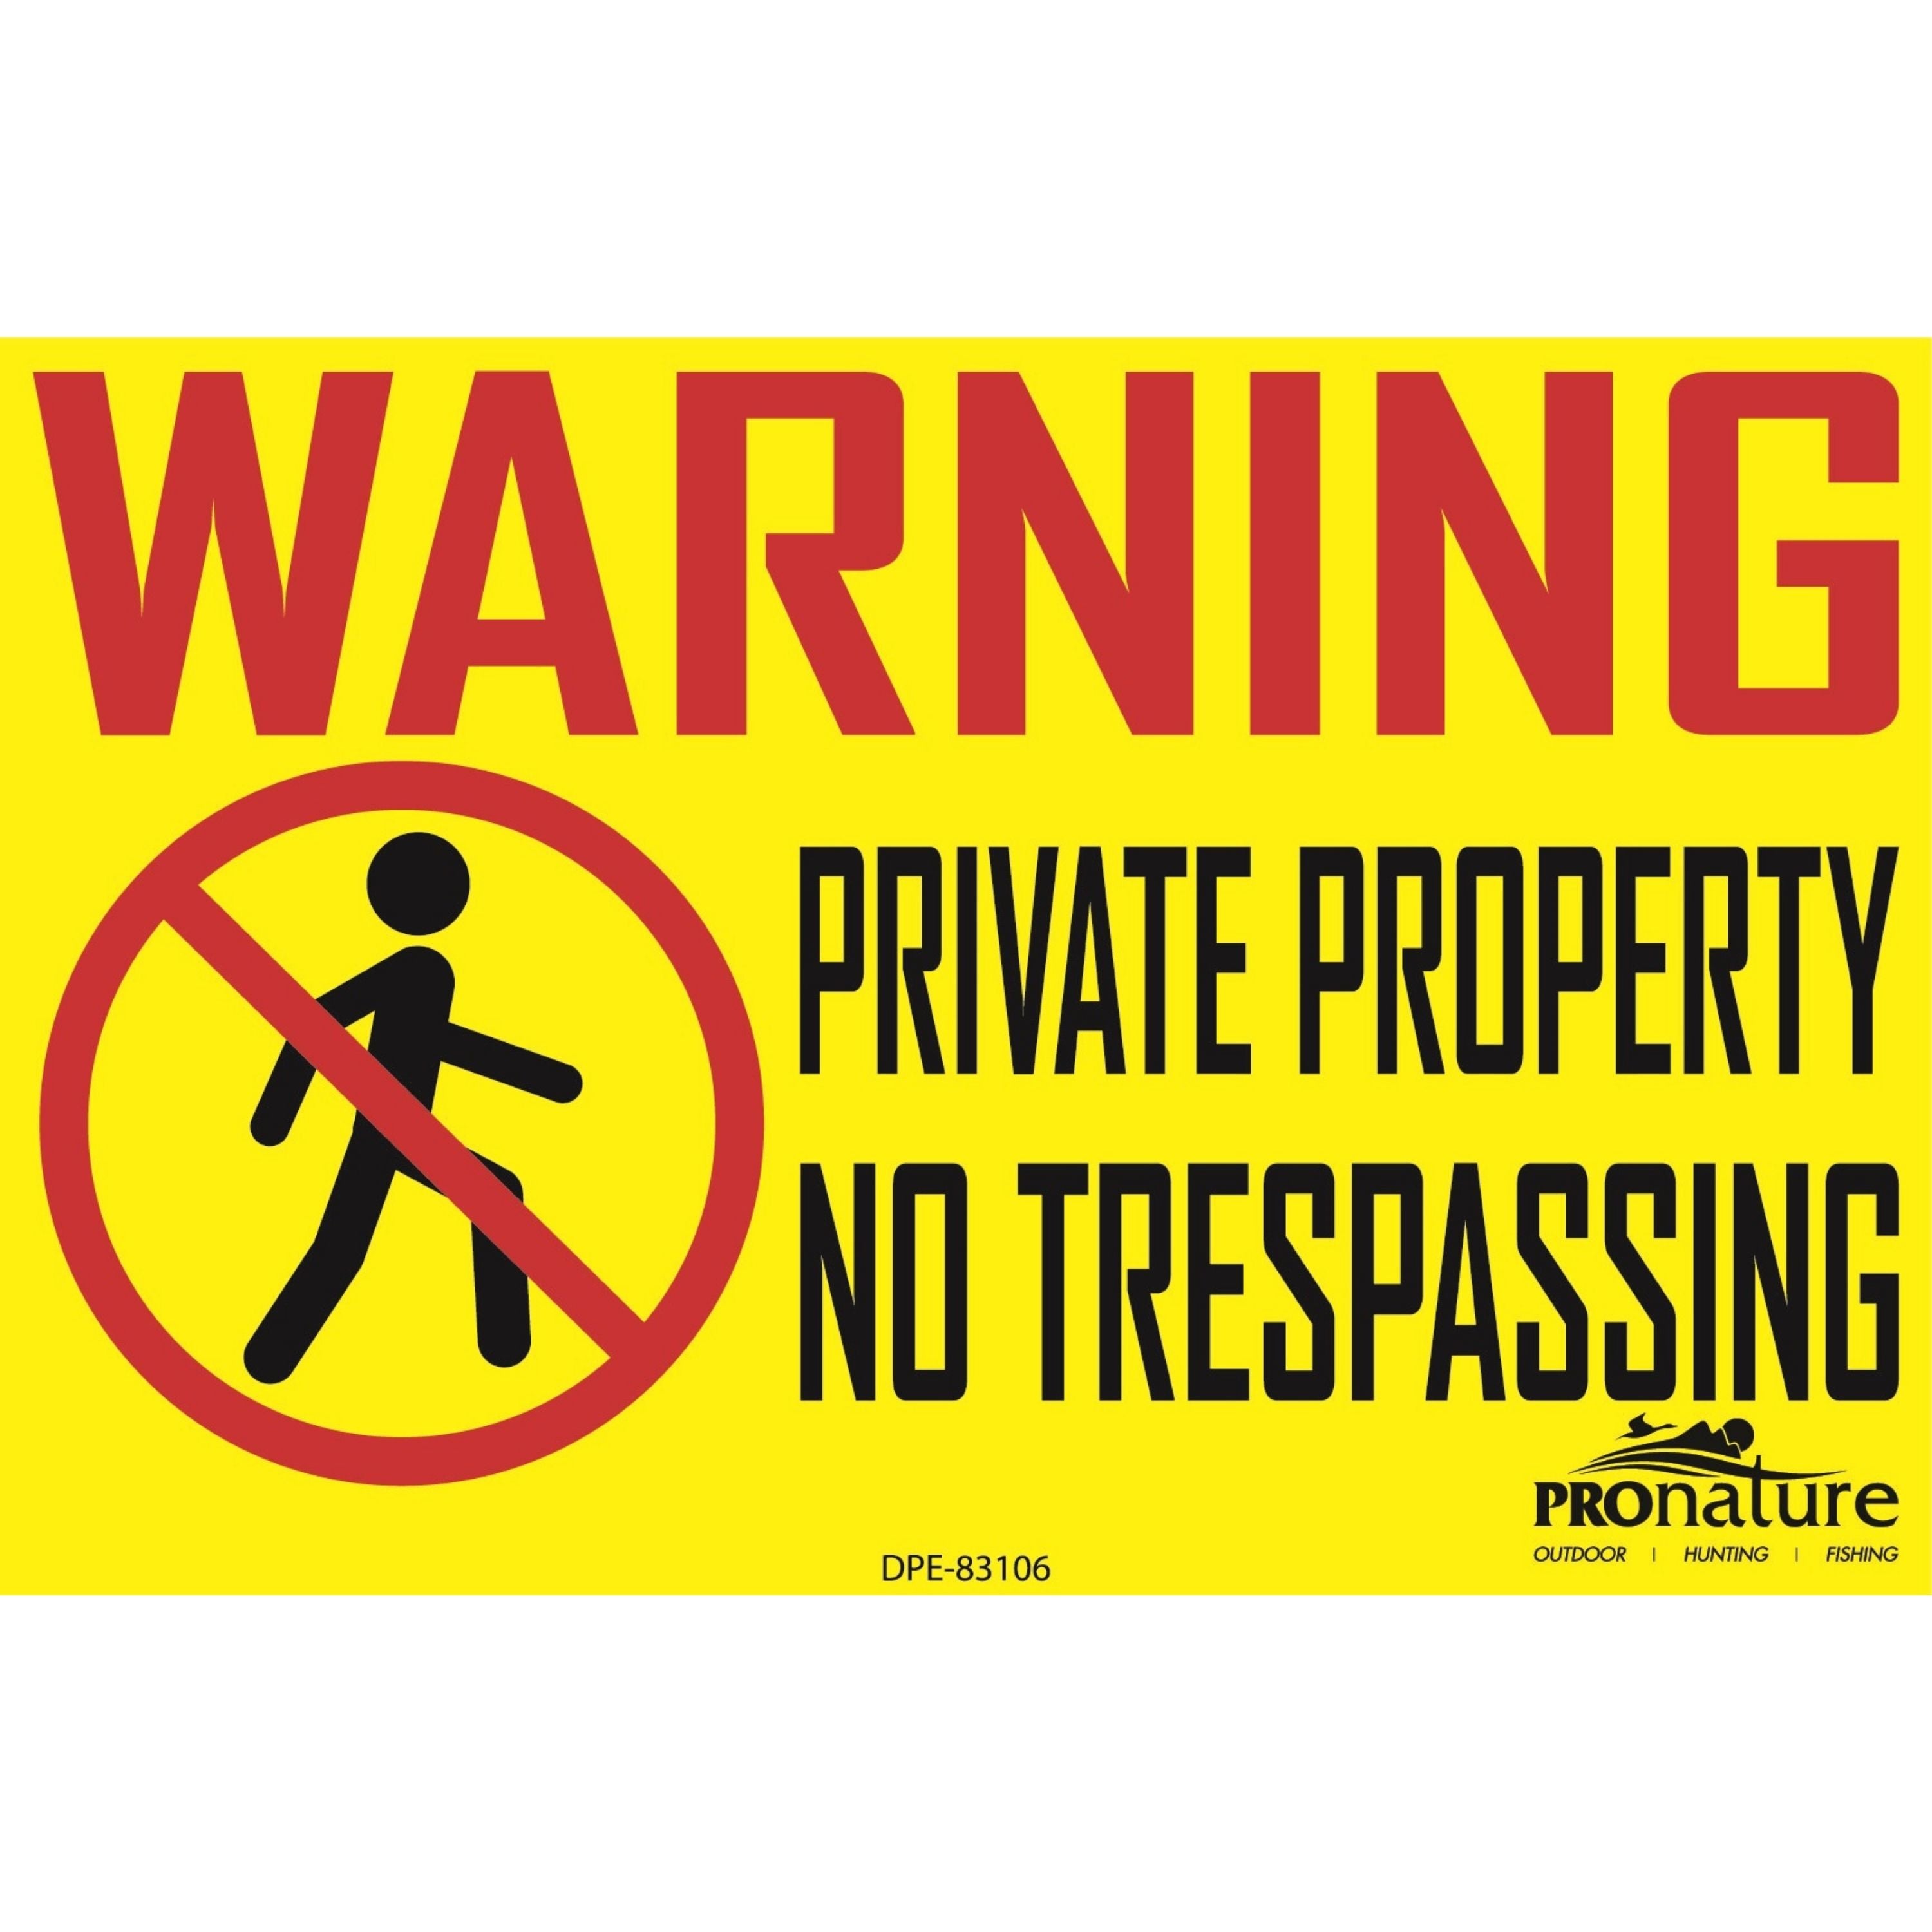 Affiche “Warning , private property”